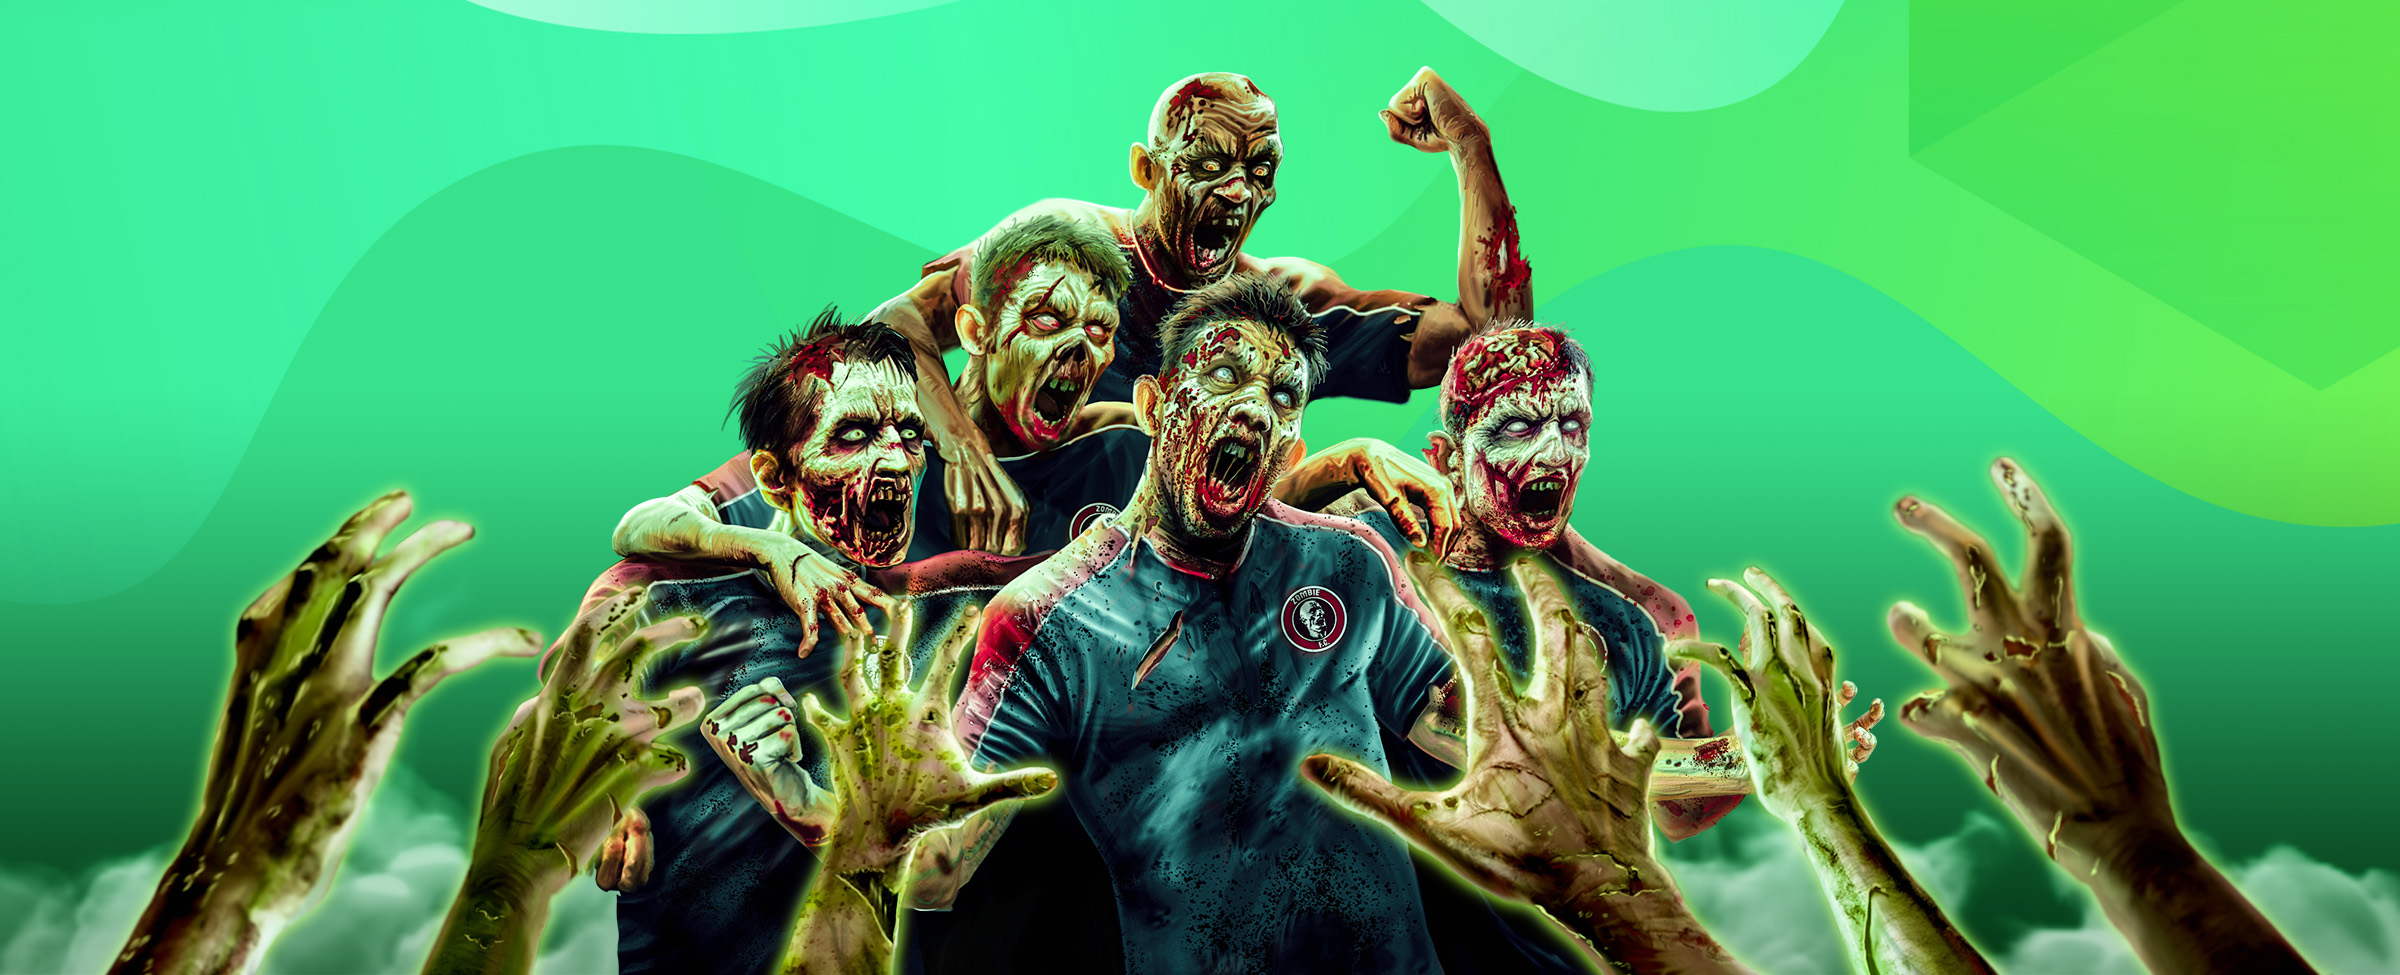 If post-apocalyptic horror is your jam, AND you are counting down the days until Tales of the Walking Dead hits your screen, SlotsLV recommends you try Zombie FC.